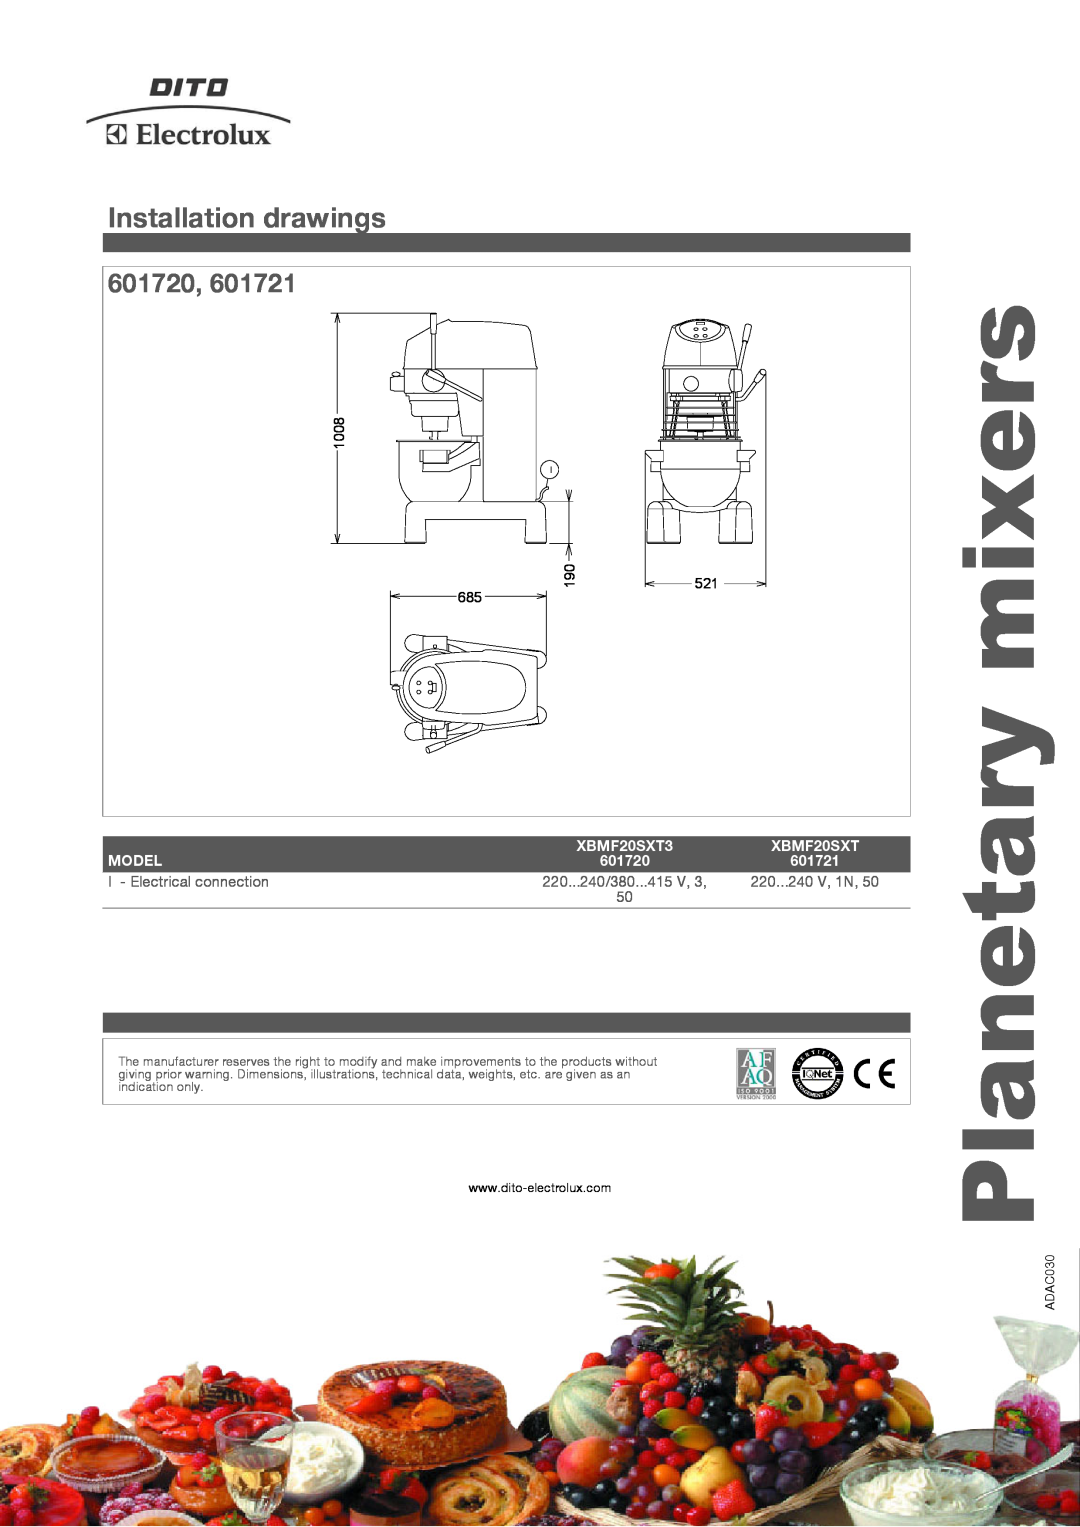 Electrolux manual Installation drawings, 601720, mixers, Planetary, Model, XBMF20SXT3, 601721 